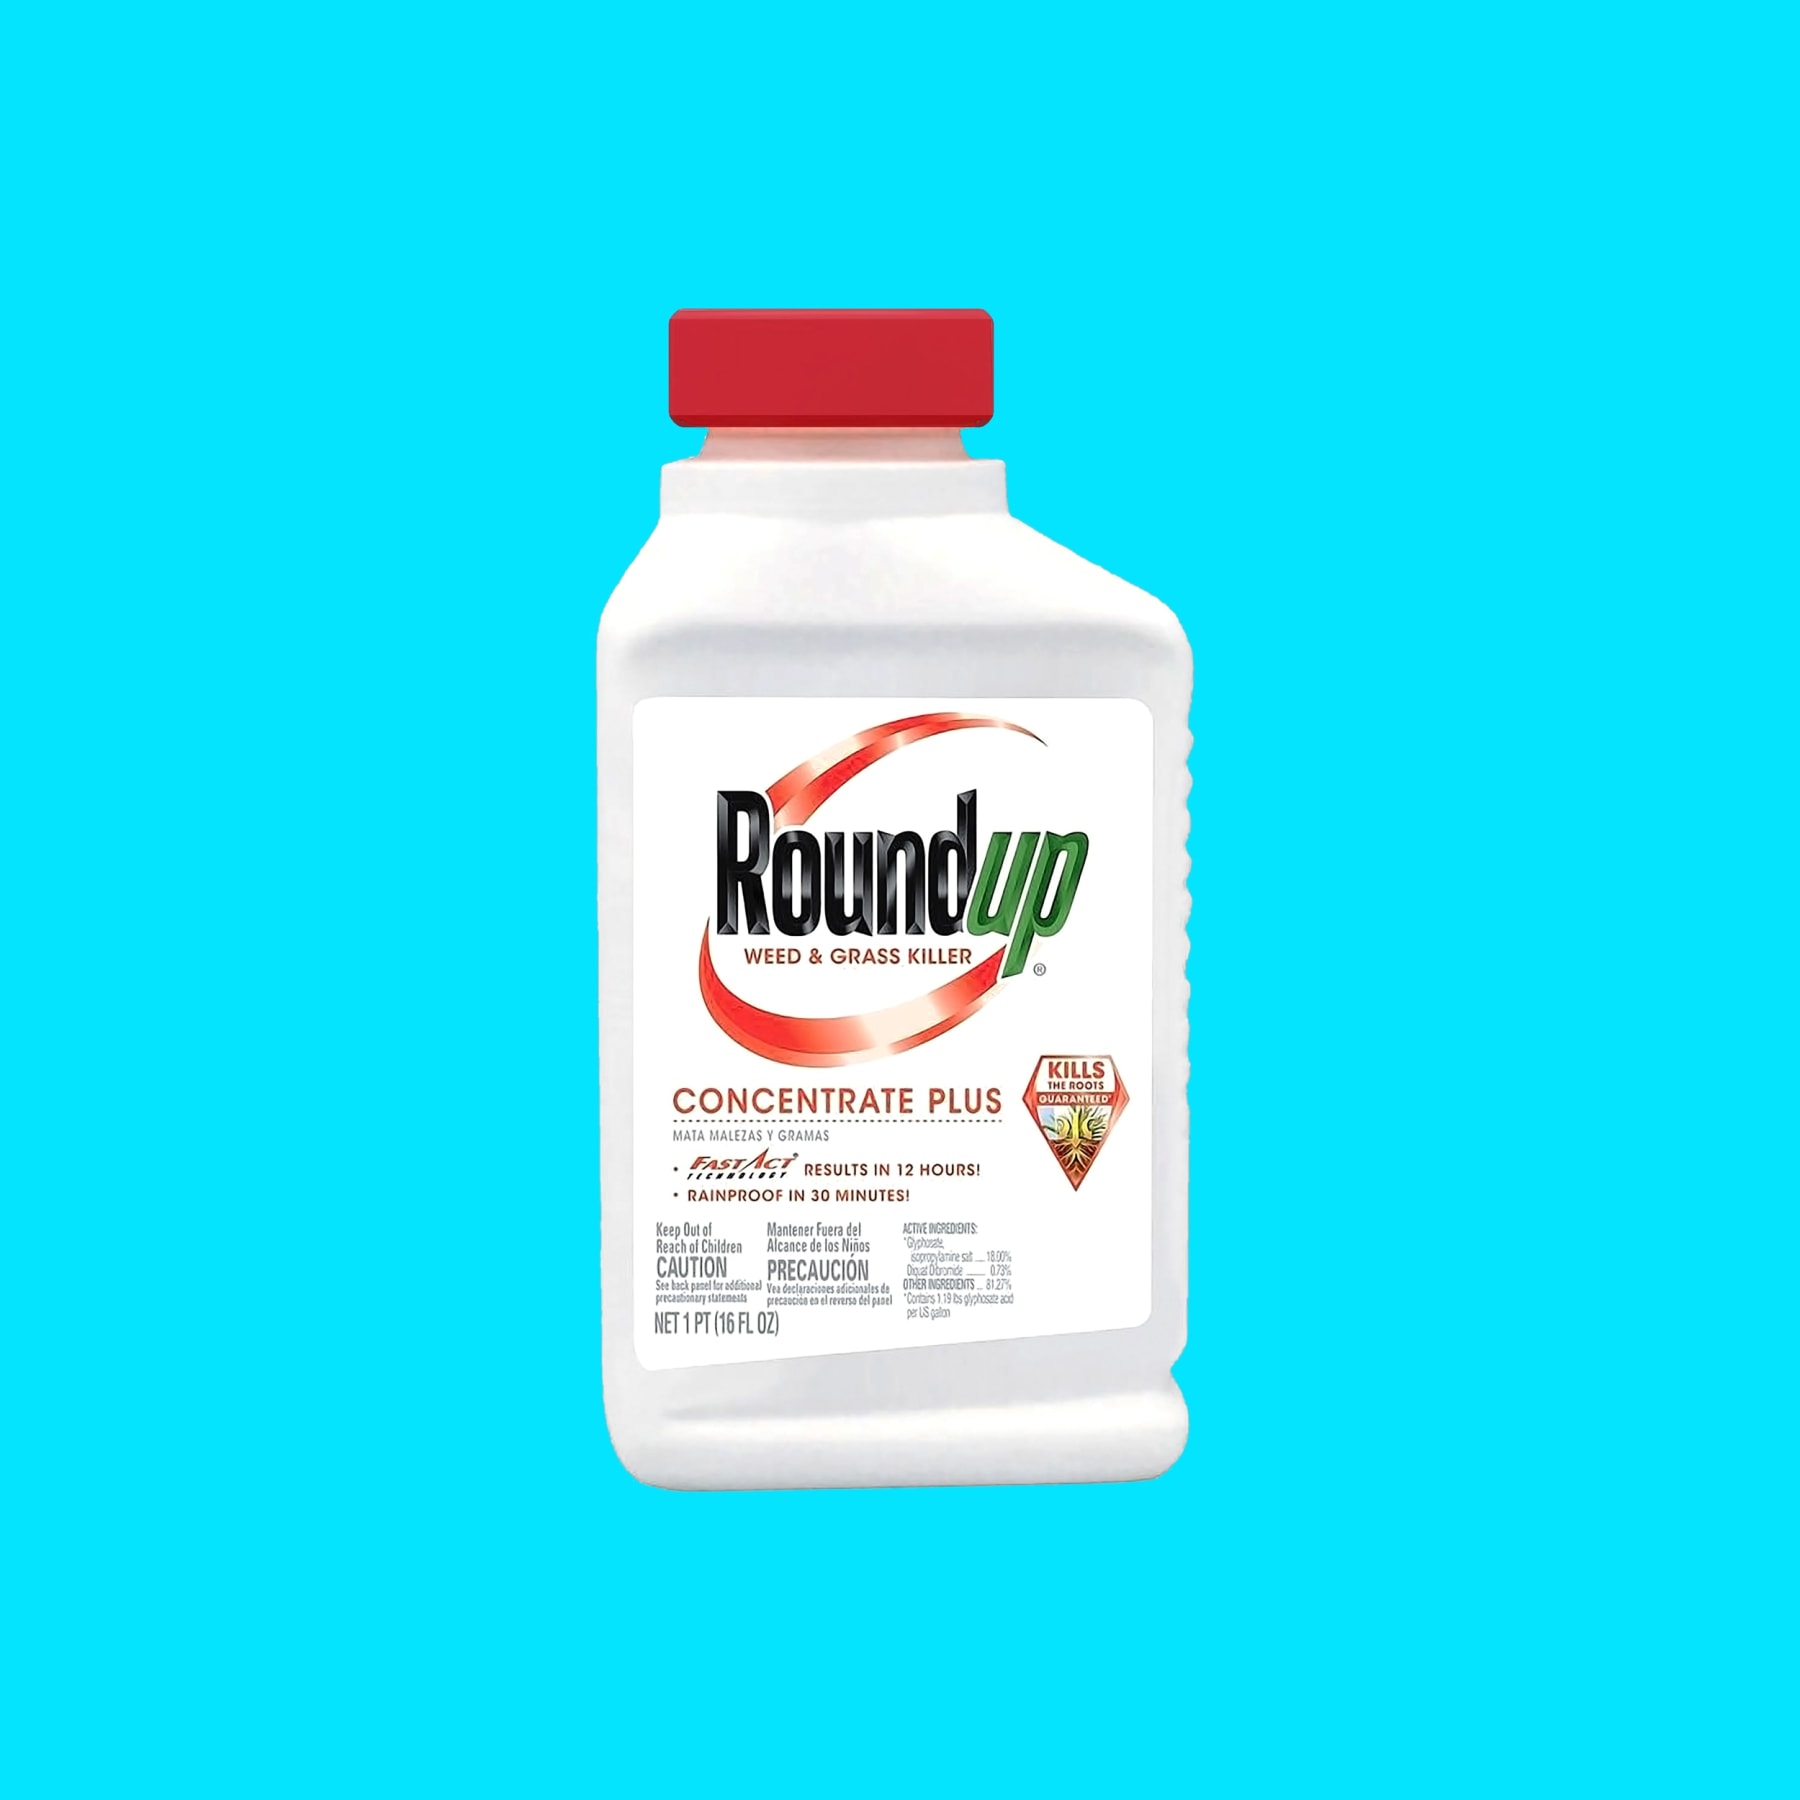 Blue background with bottle of Roundup Concentrate Plus, square image.